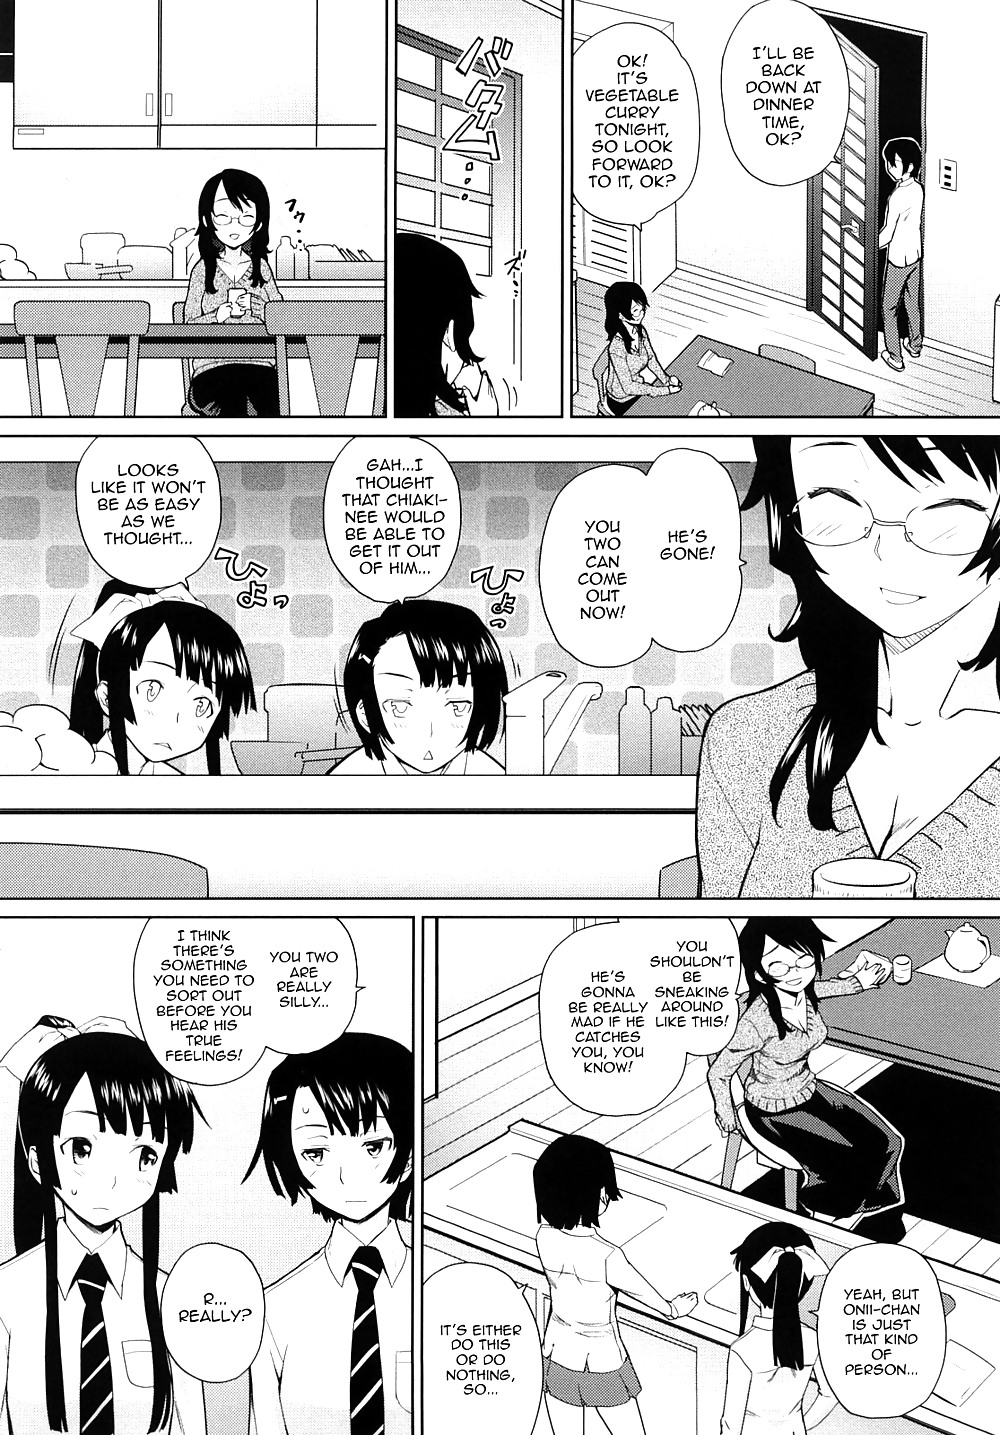 (HENTAI Comic) While Their Guardian is on A Business Trip #36869441